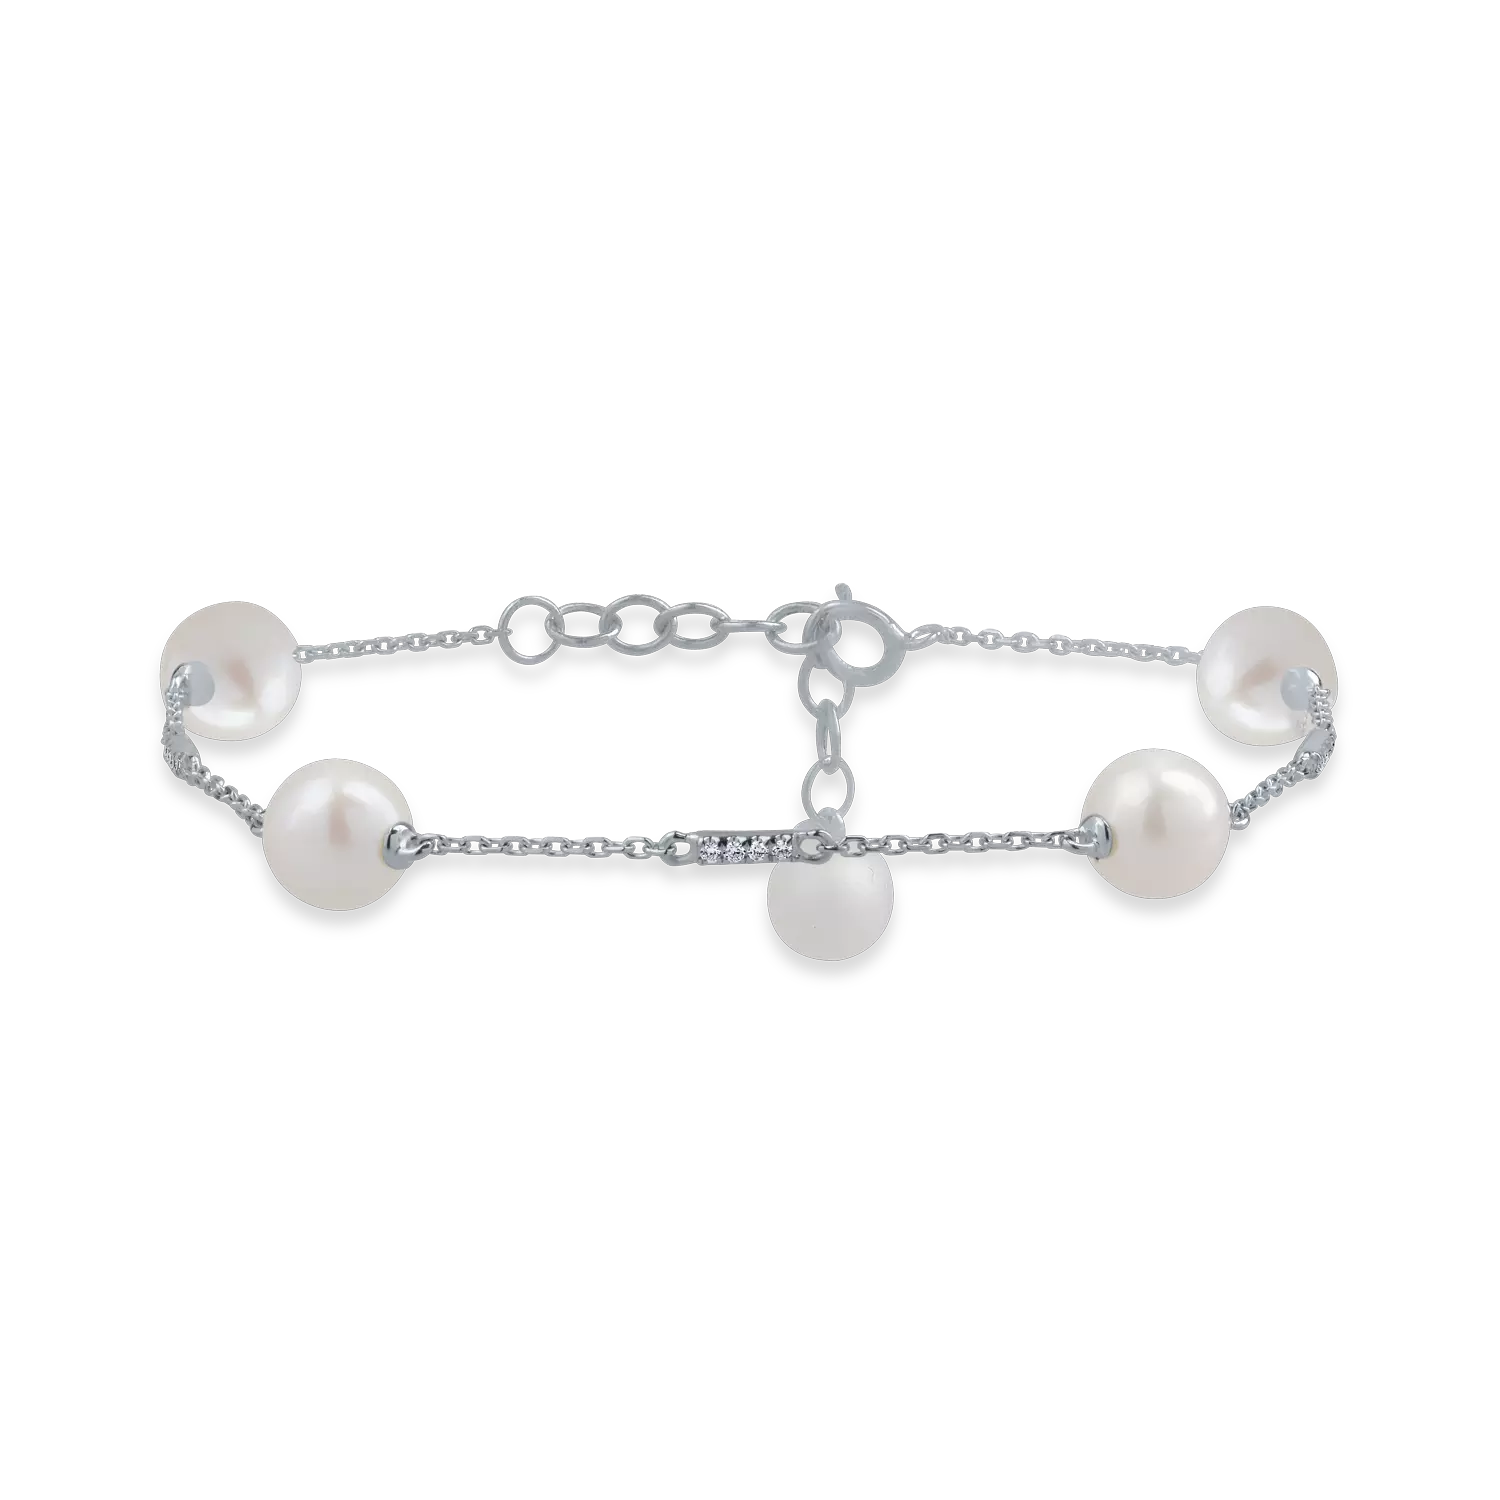 White gold bracelet with 10.52ct fresh water pearls and 0.05ct diamonds